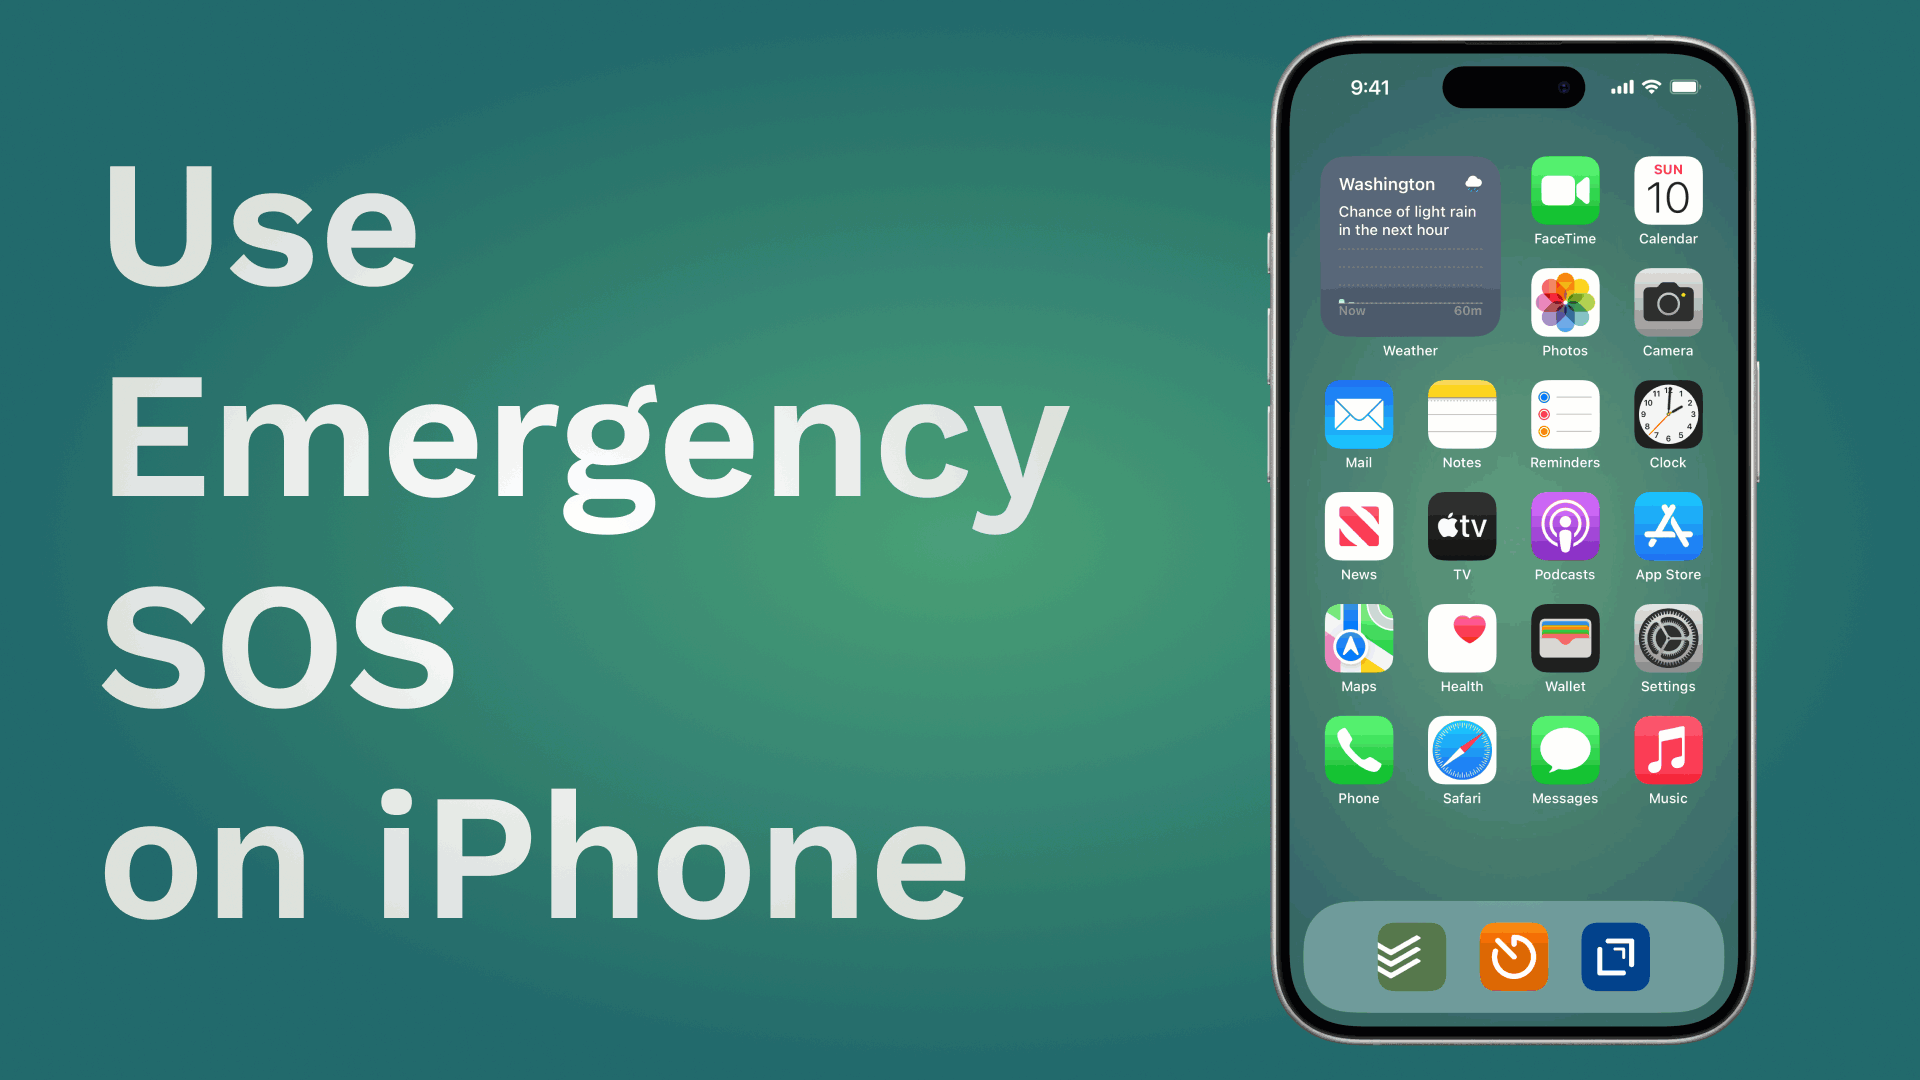  Emergency SOS on iPhone: Access the feature by pressing the side button five times quickly. It allows you to quickly call emergency services.